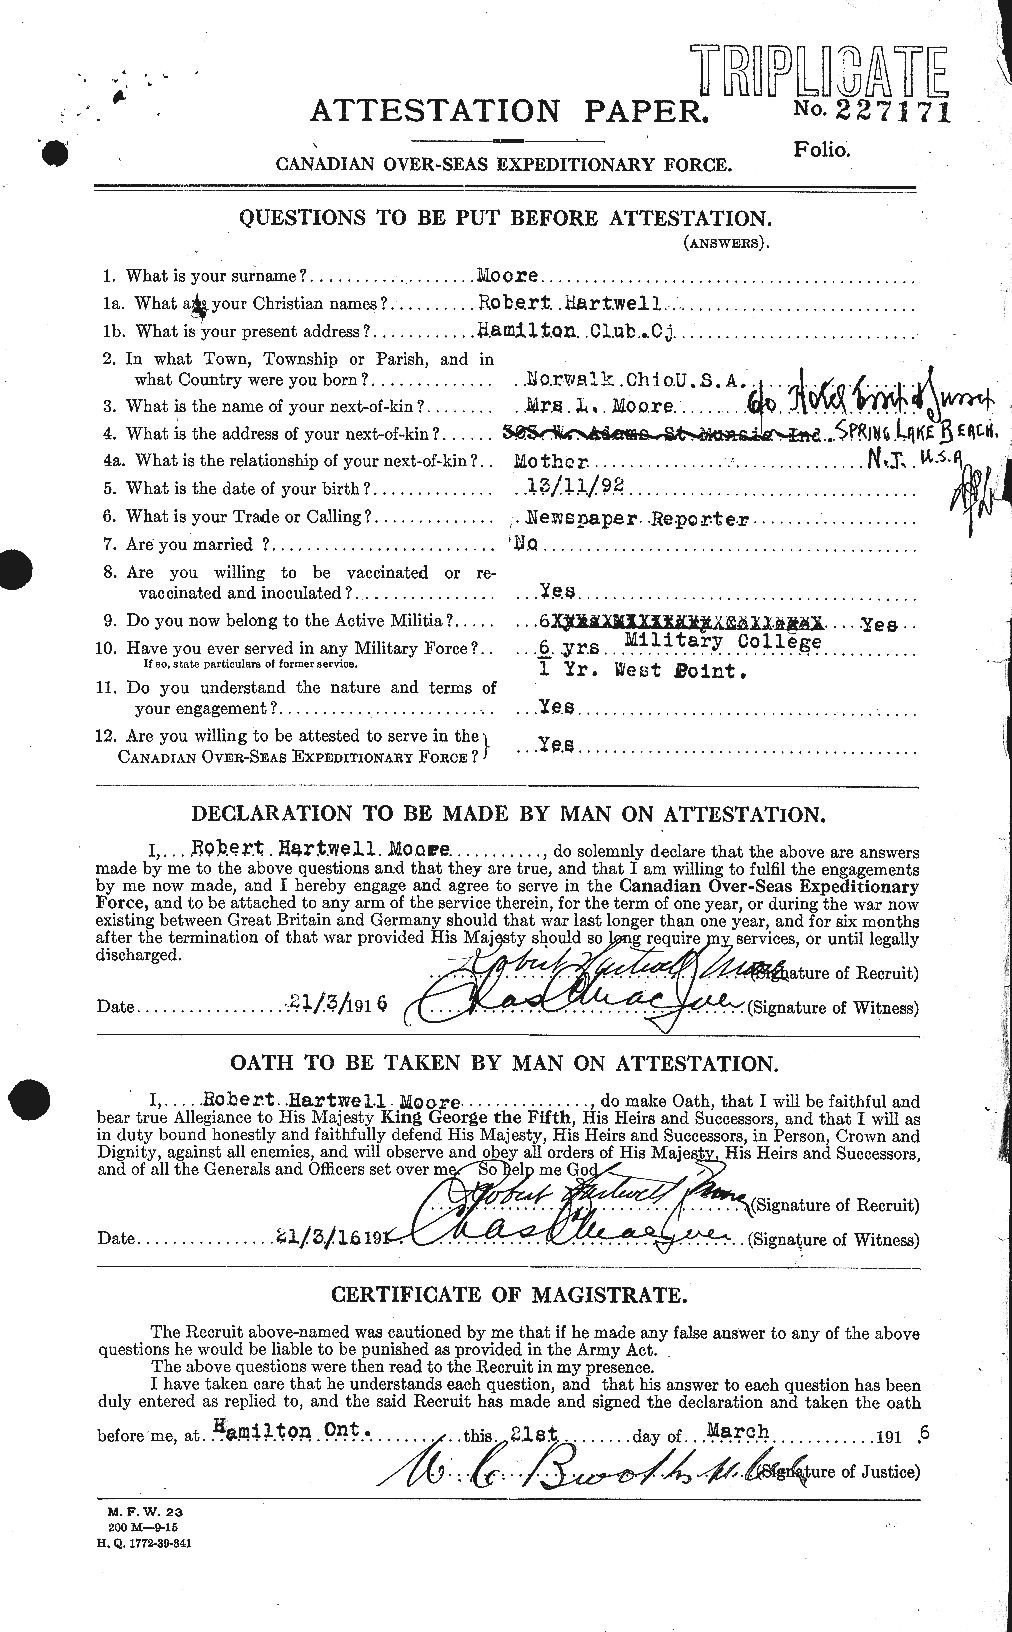 Personnel Records of the First World War - CEF 503568a